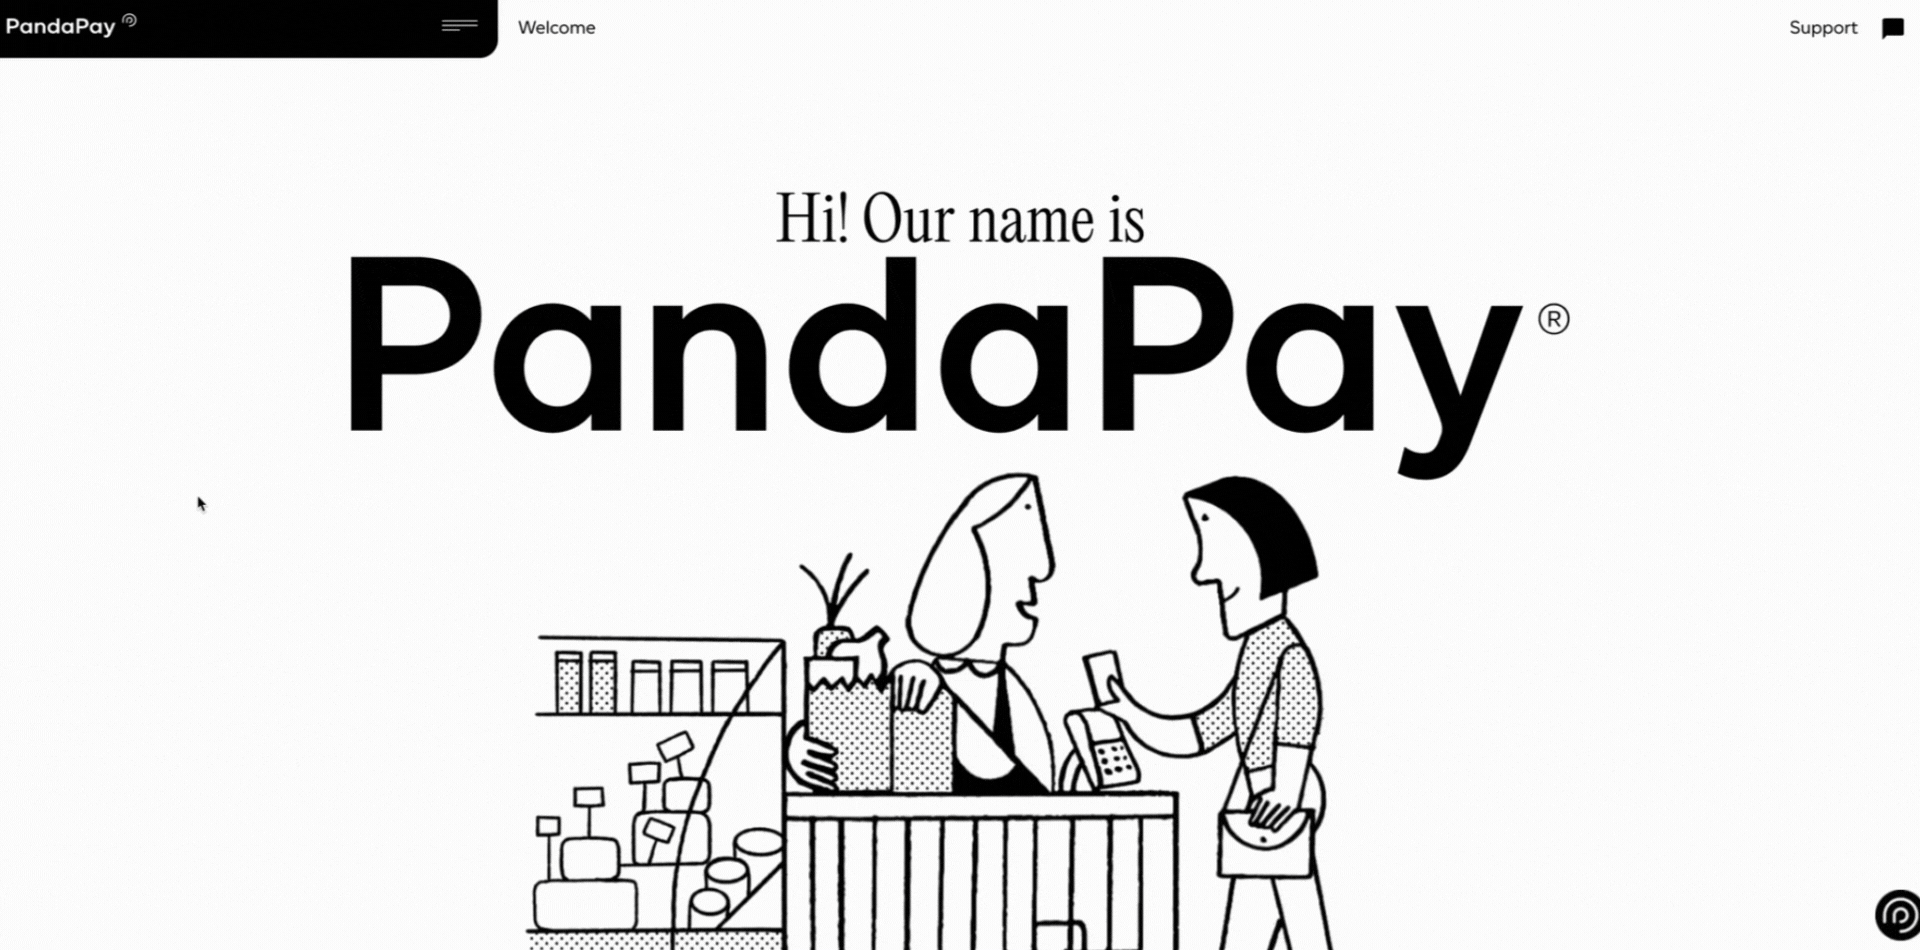 PandaPay's technology website design is distinguished by its use of original illustrations and fonts 